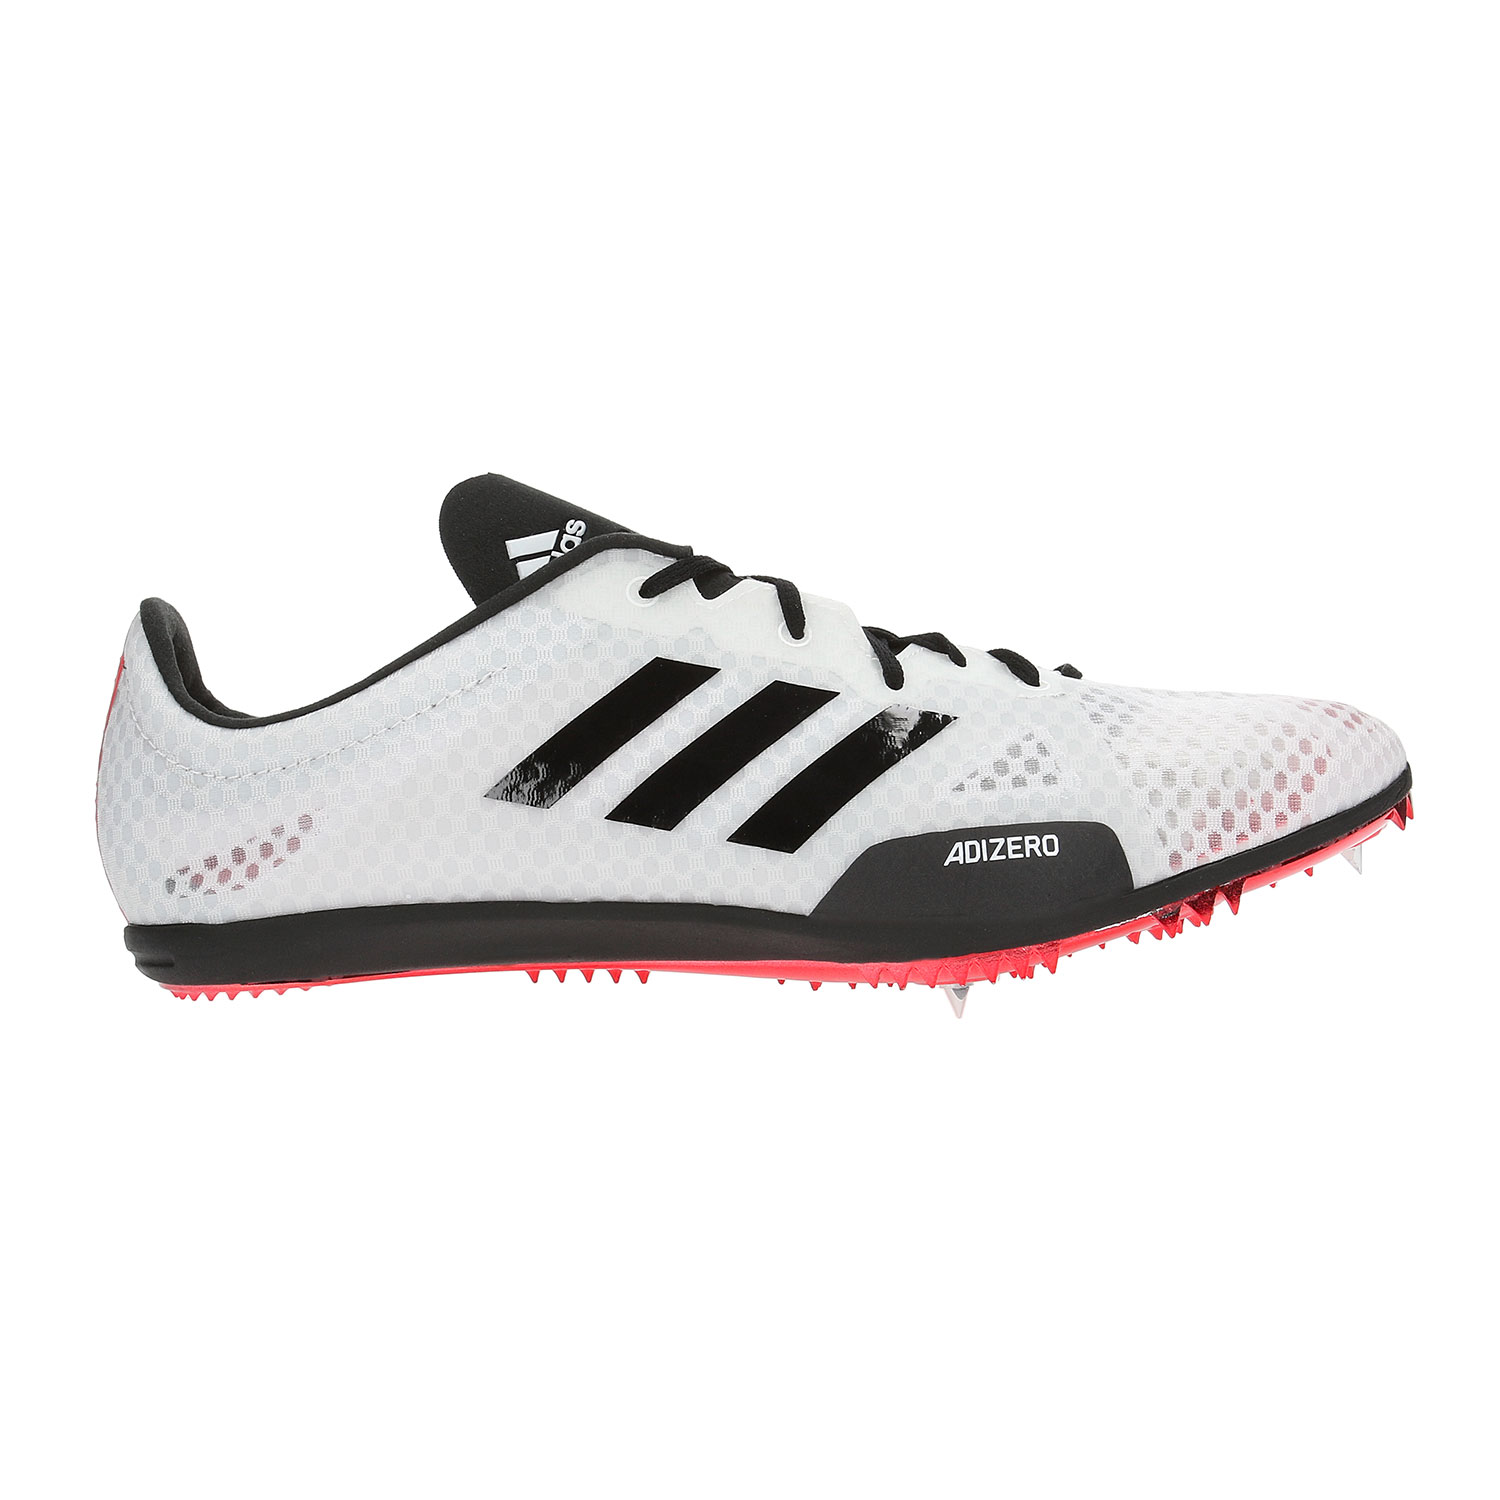 adidas chiodate atletica